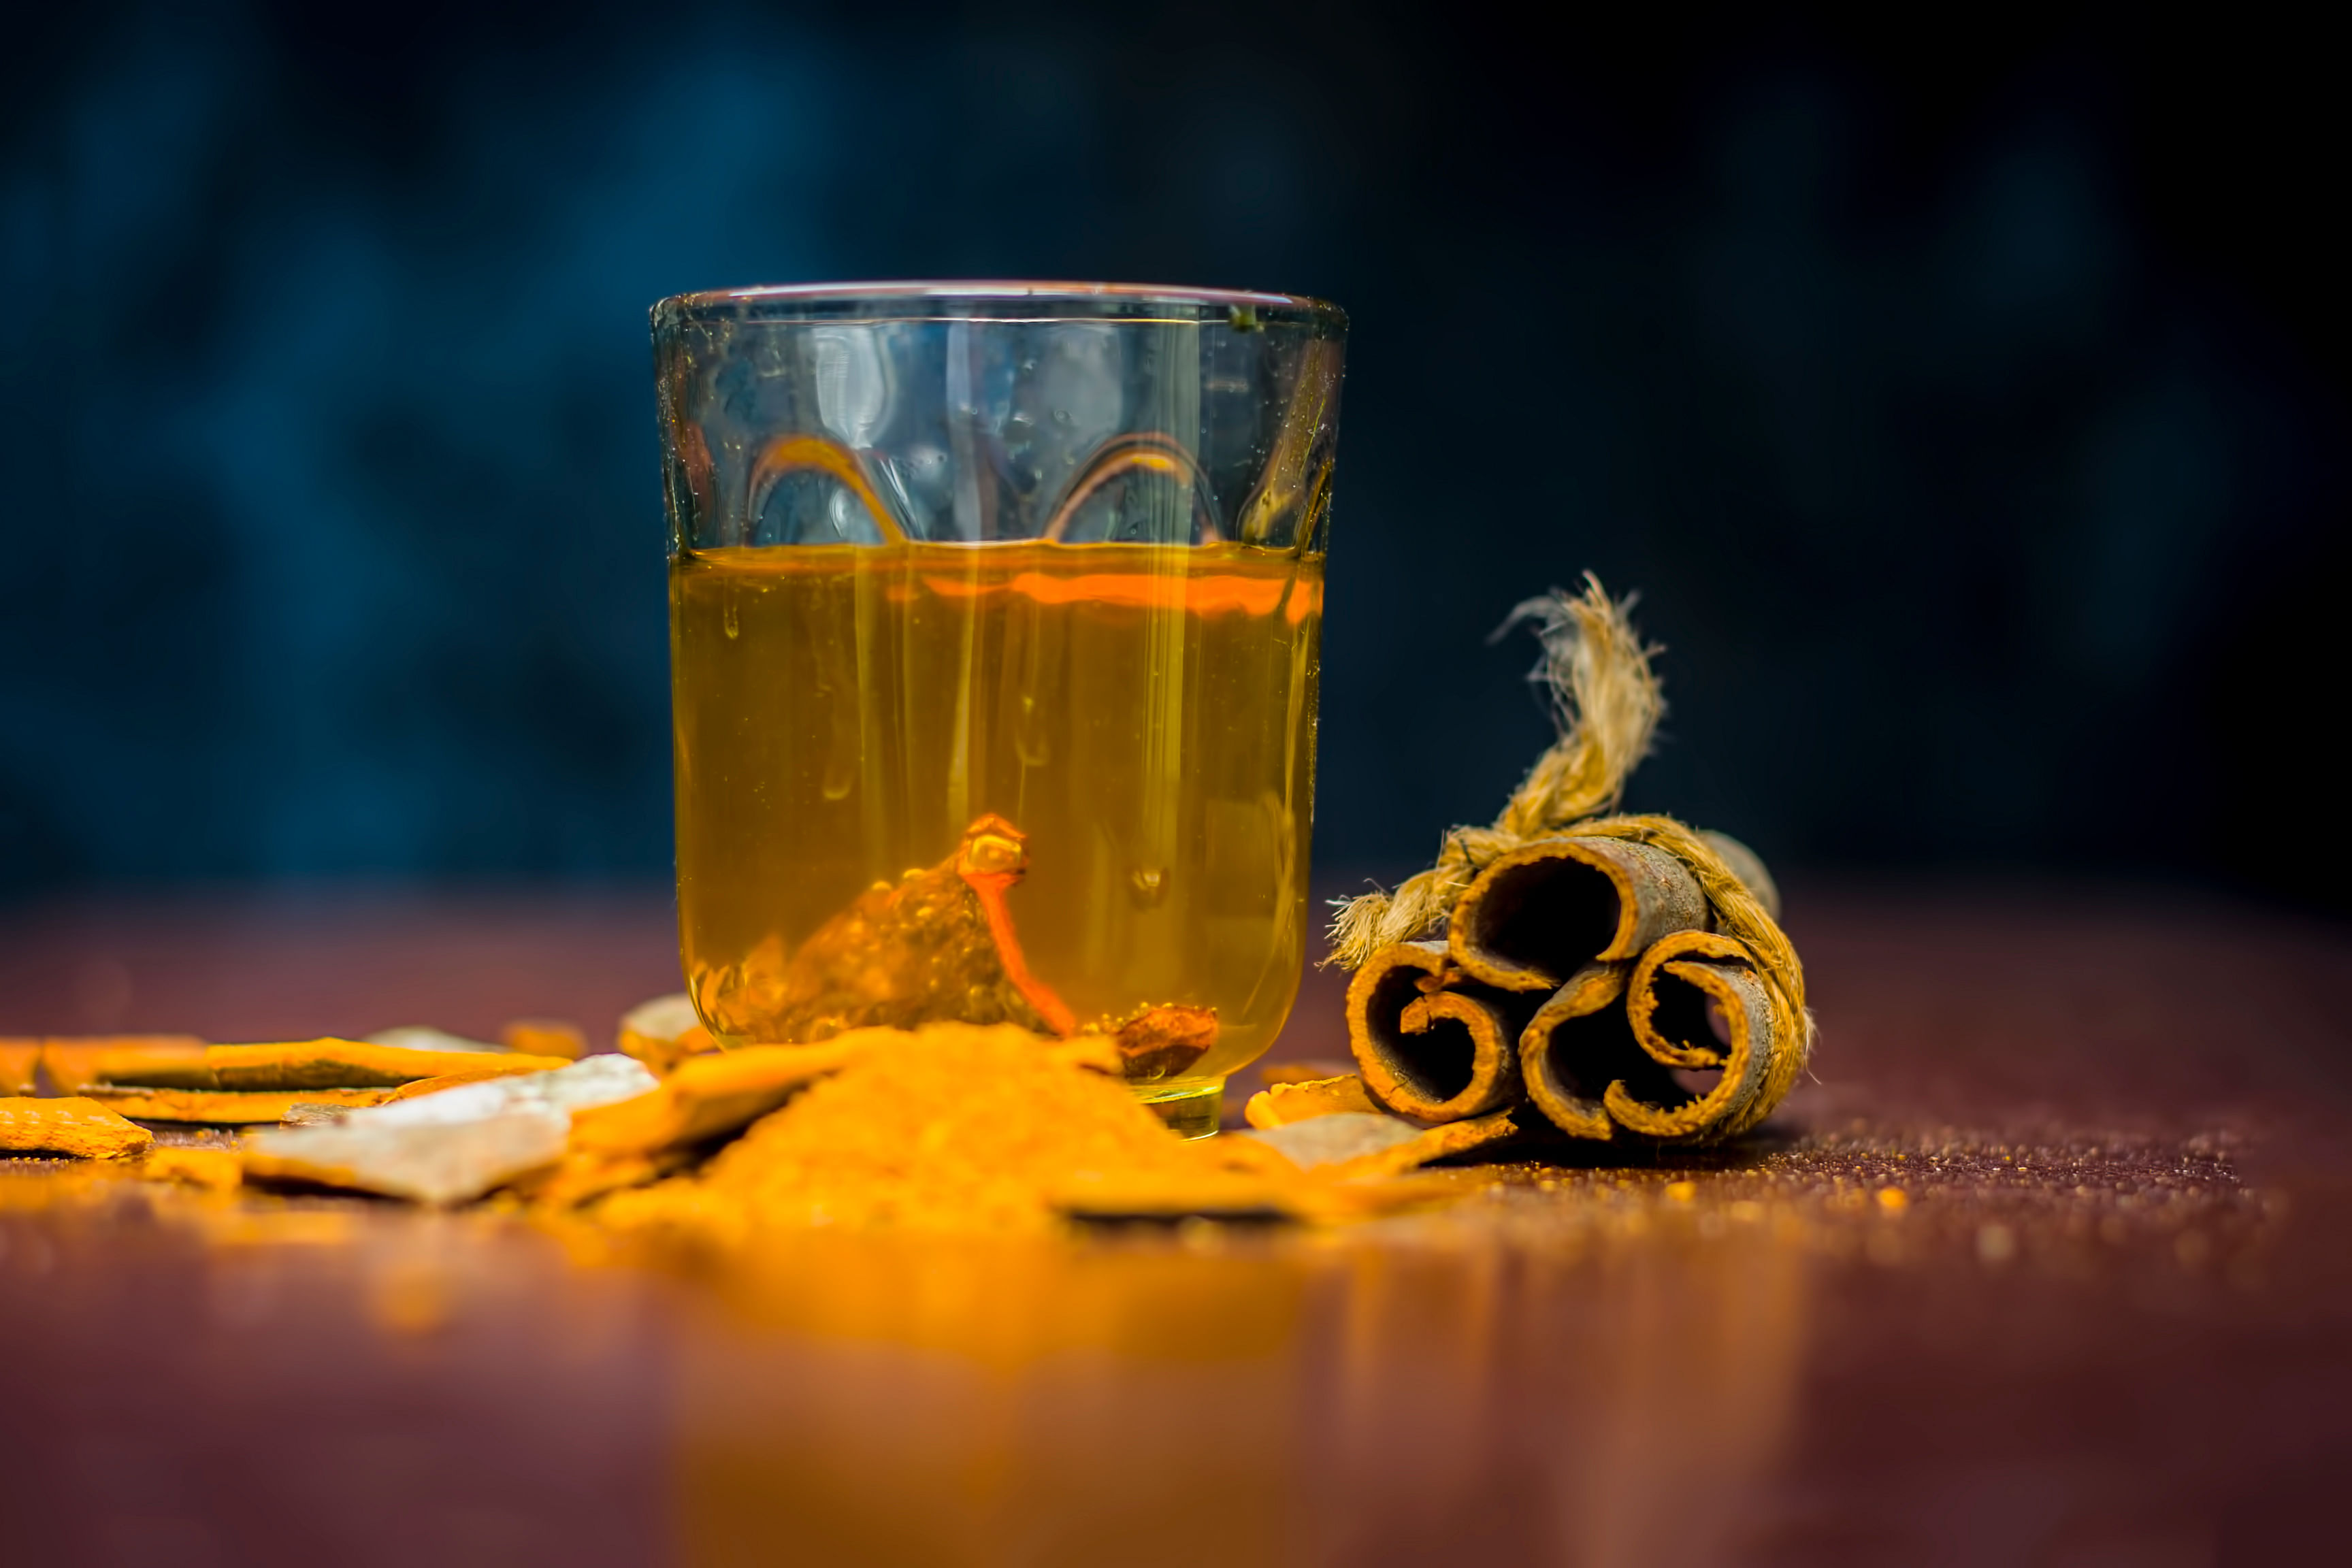 The amendment proposes introduction of a consultation process with the technical bodies associated with Ayurveda, Unani or Siddha system before a remedy is declared magic remedy. (Credit: iStockPhoto)